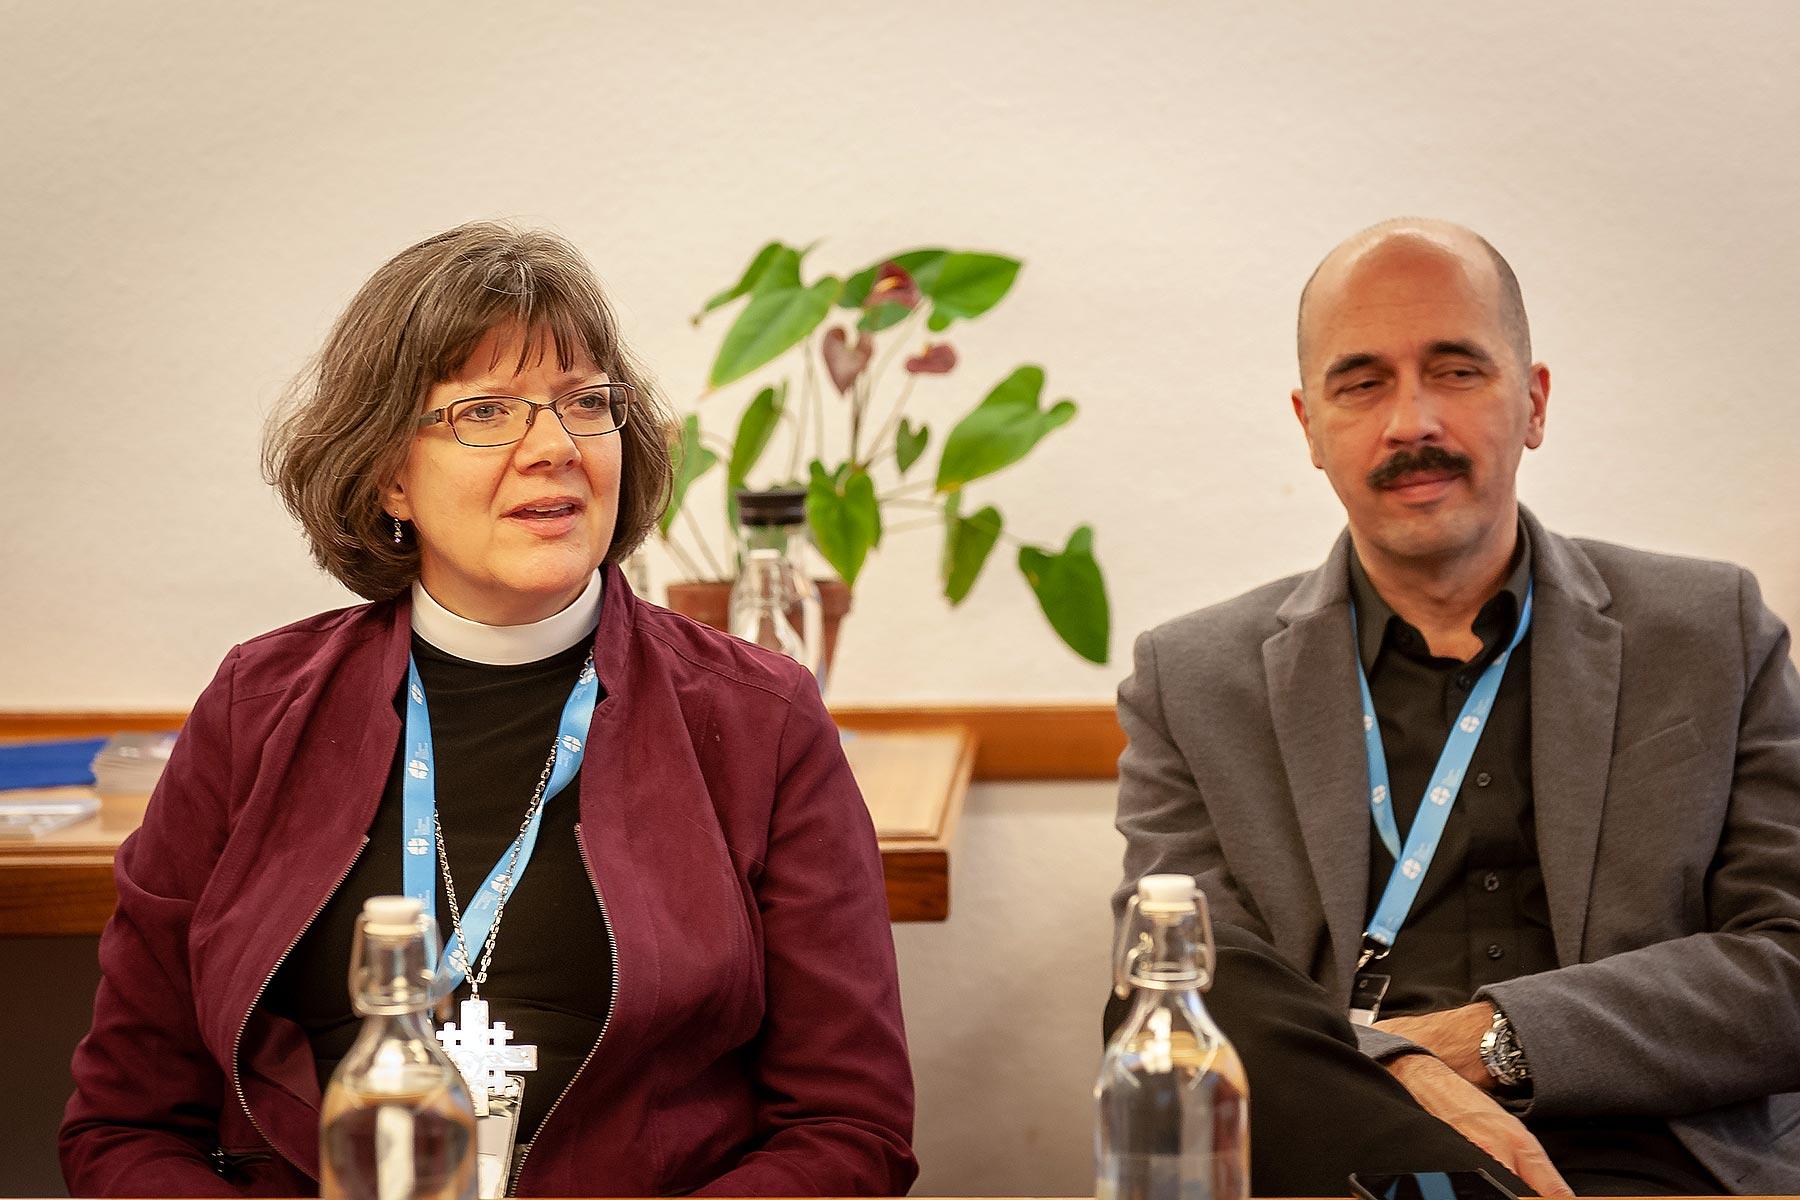 From left to right: Katherine Finegan (USA) and PÃ©ter Kondor (Hungary) during the RoNEL meeting in the Ecumenical Center, Geneva, 19-23 November 2018. Photo: LWF/A. Danielsson